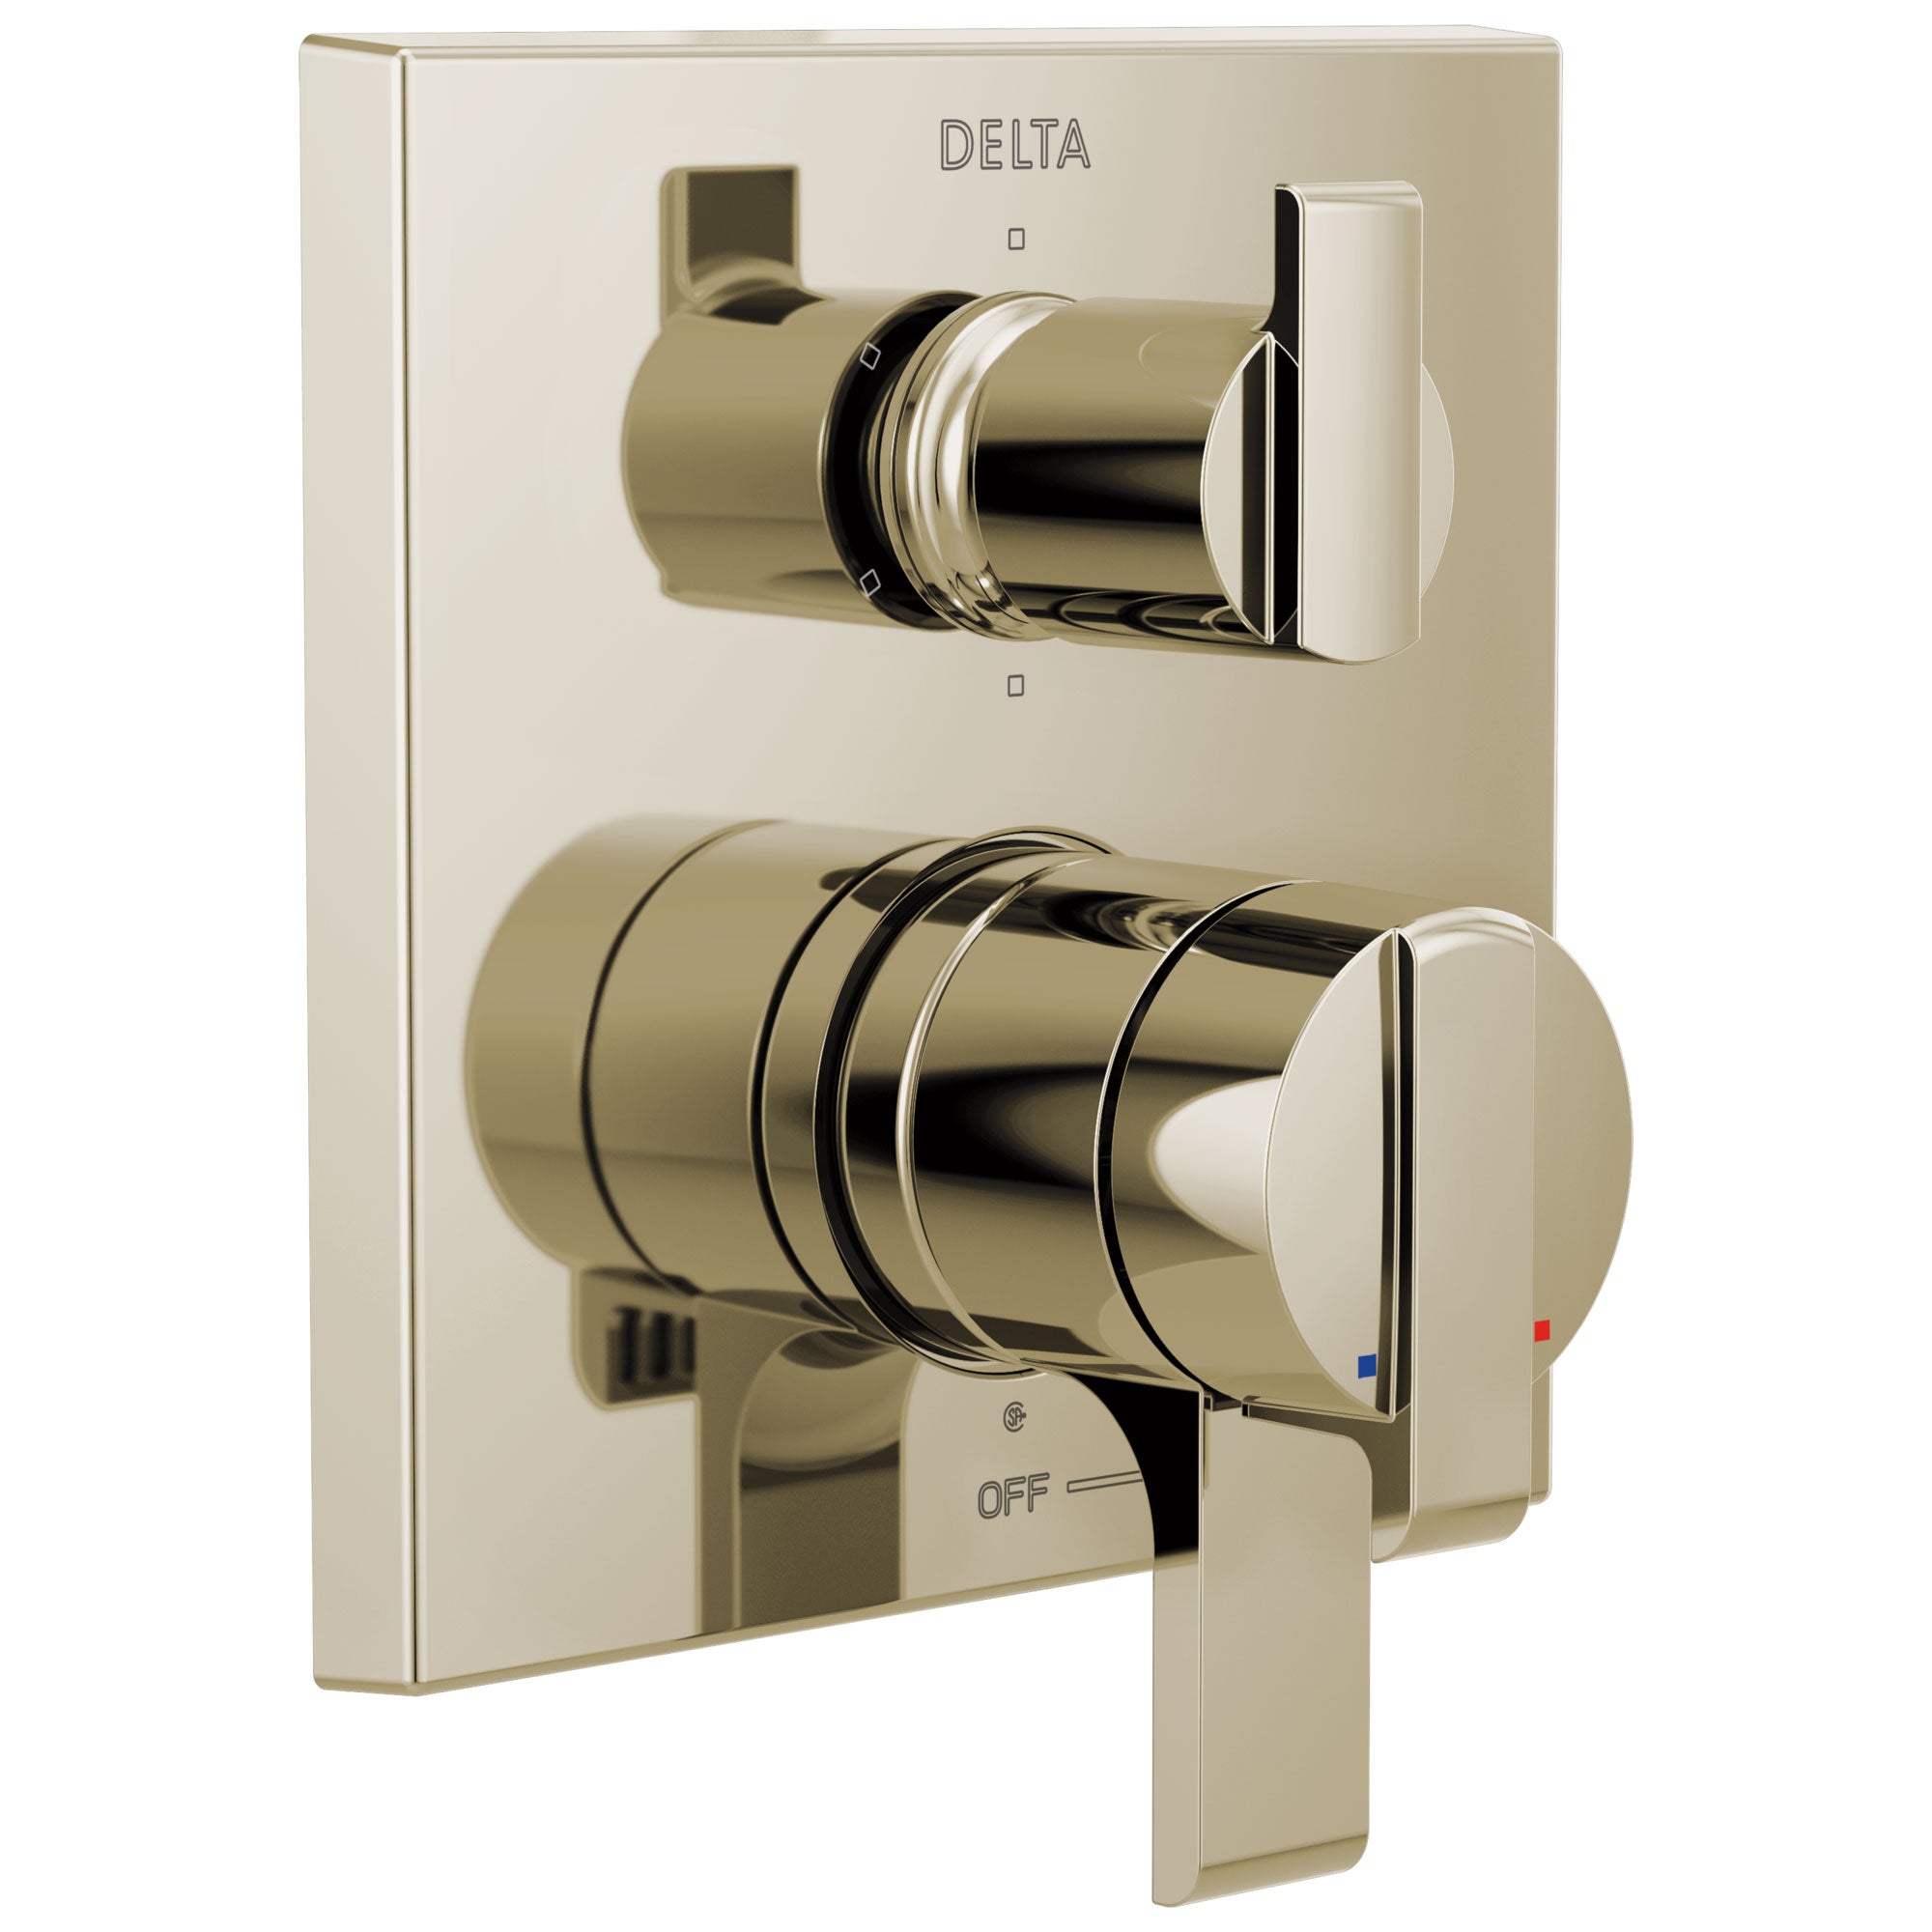 Delta Ara Polished Nickel Finish Angular Modern 17 Series Shower System Control with 6-Setting Integrated Diverter Includes Valve and Handles D3129V